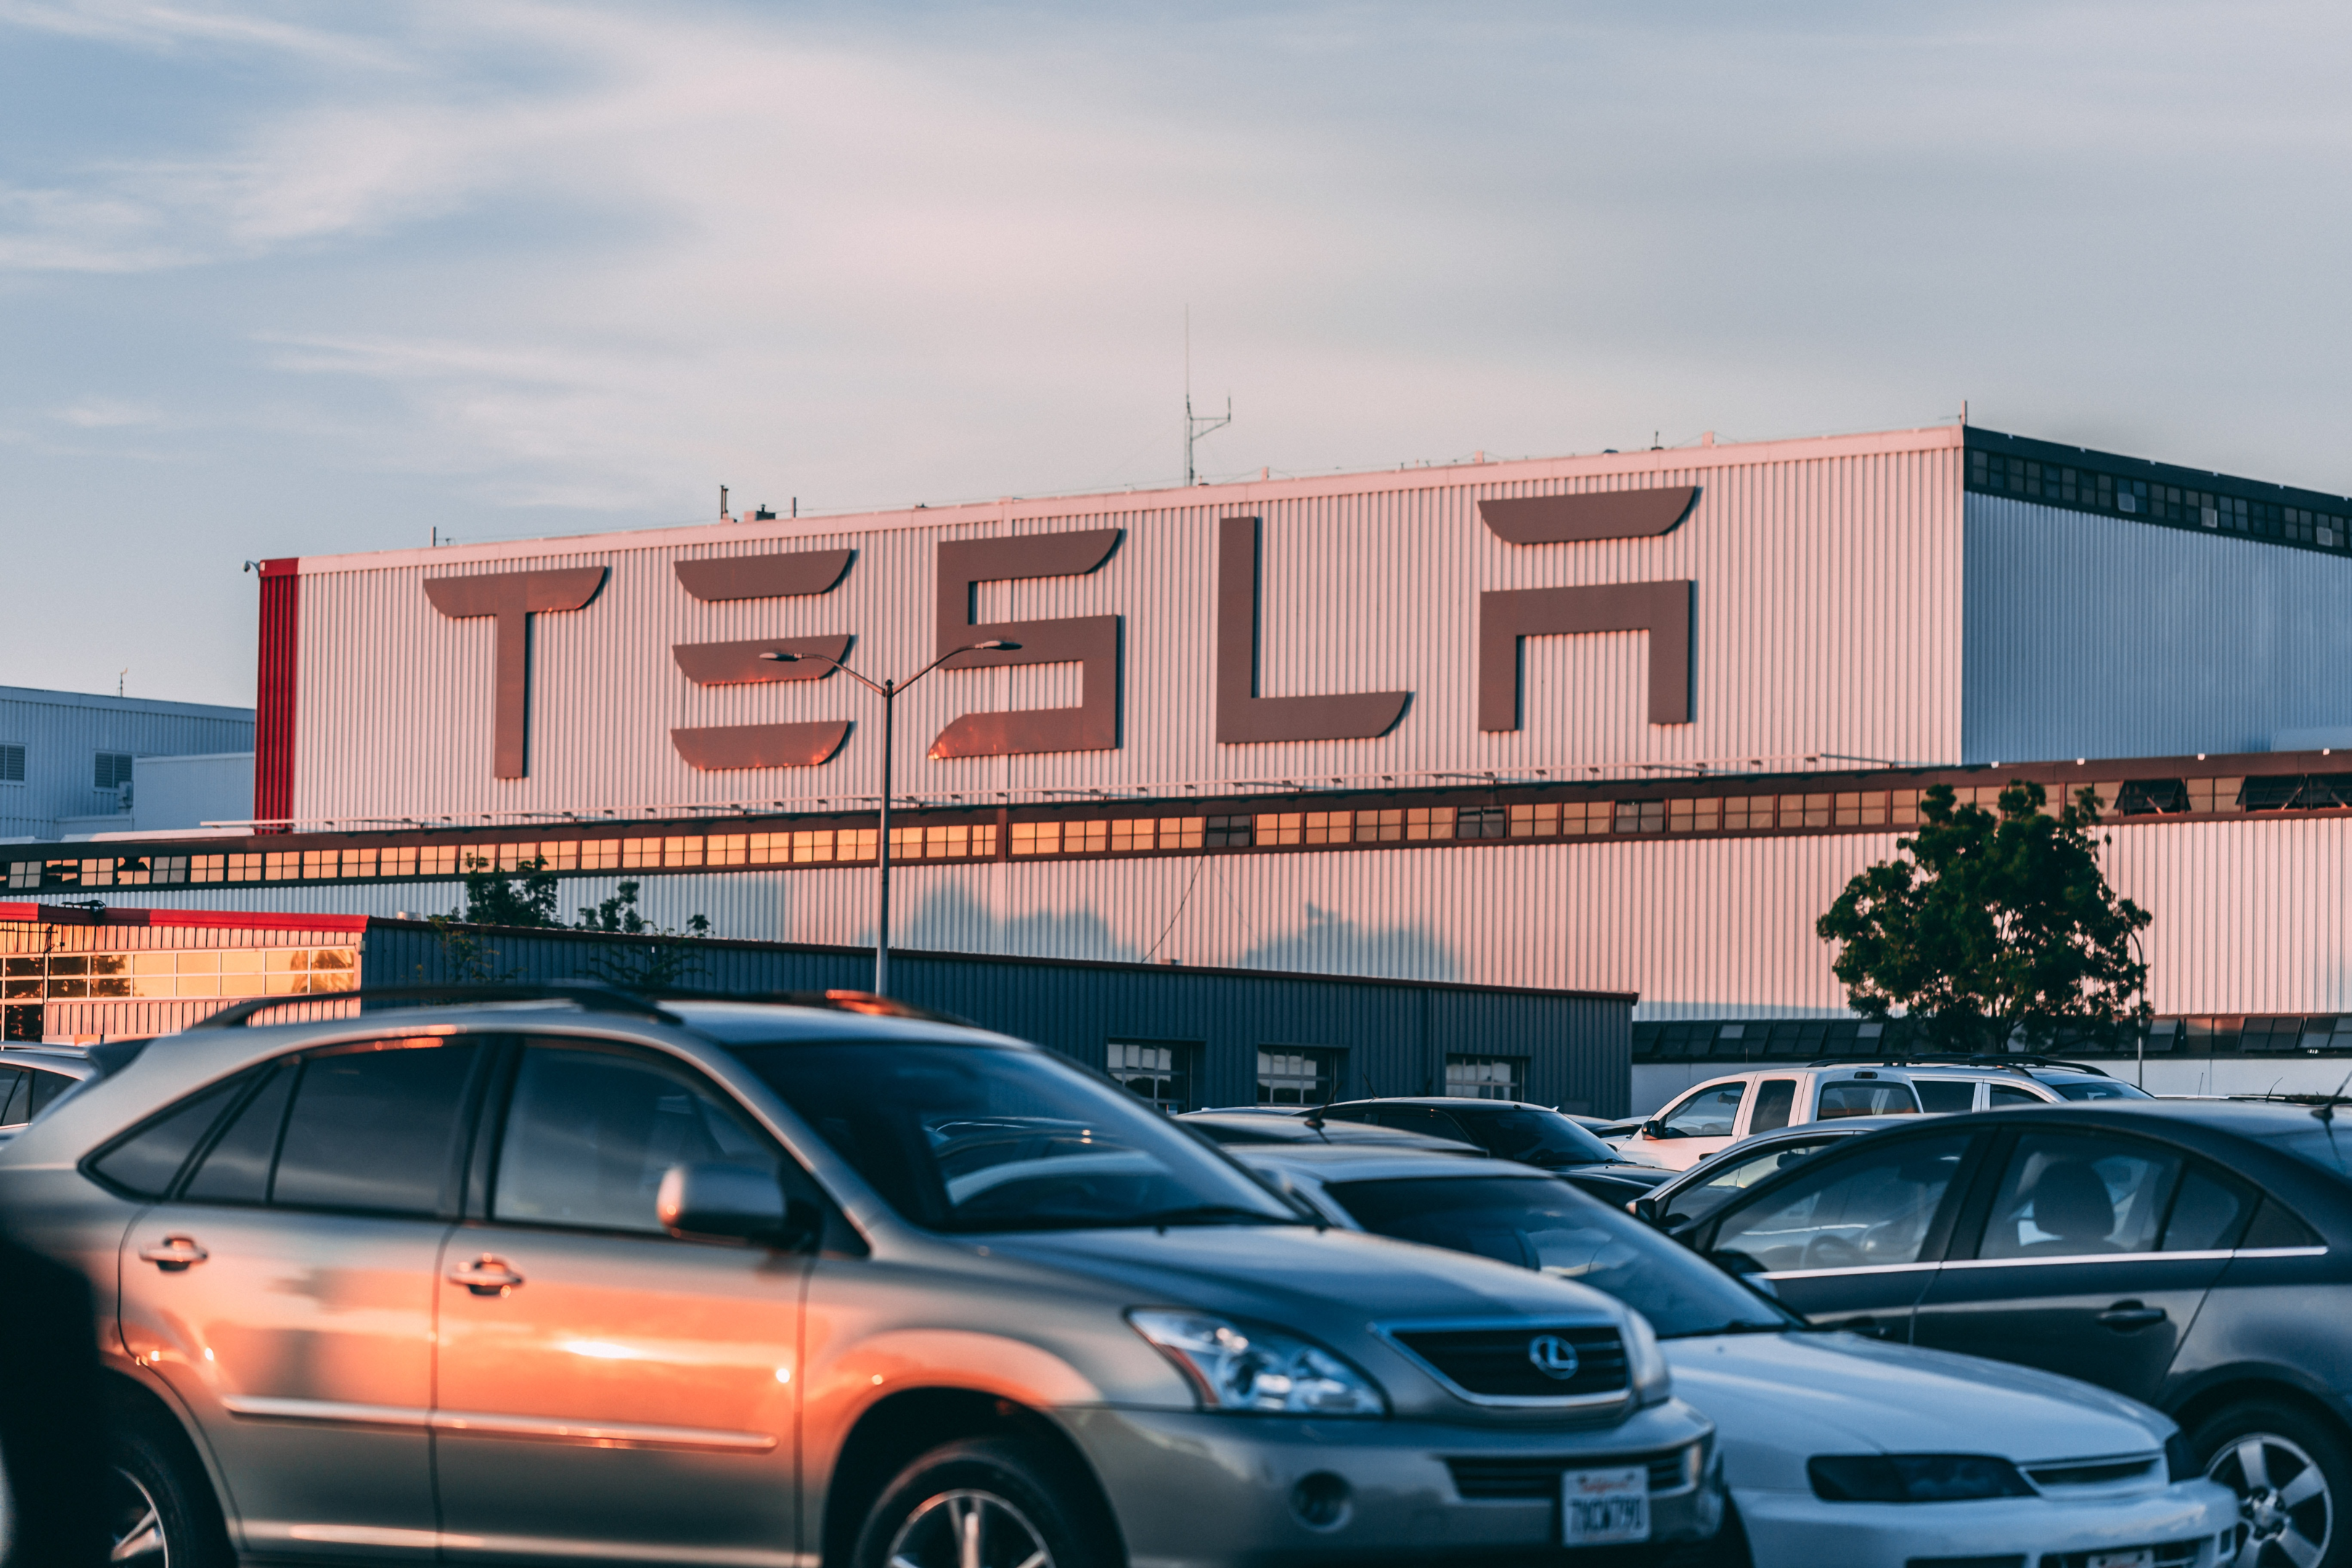 Tesla is the largest manufacturer of electric cars